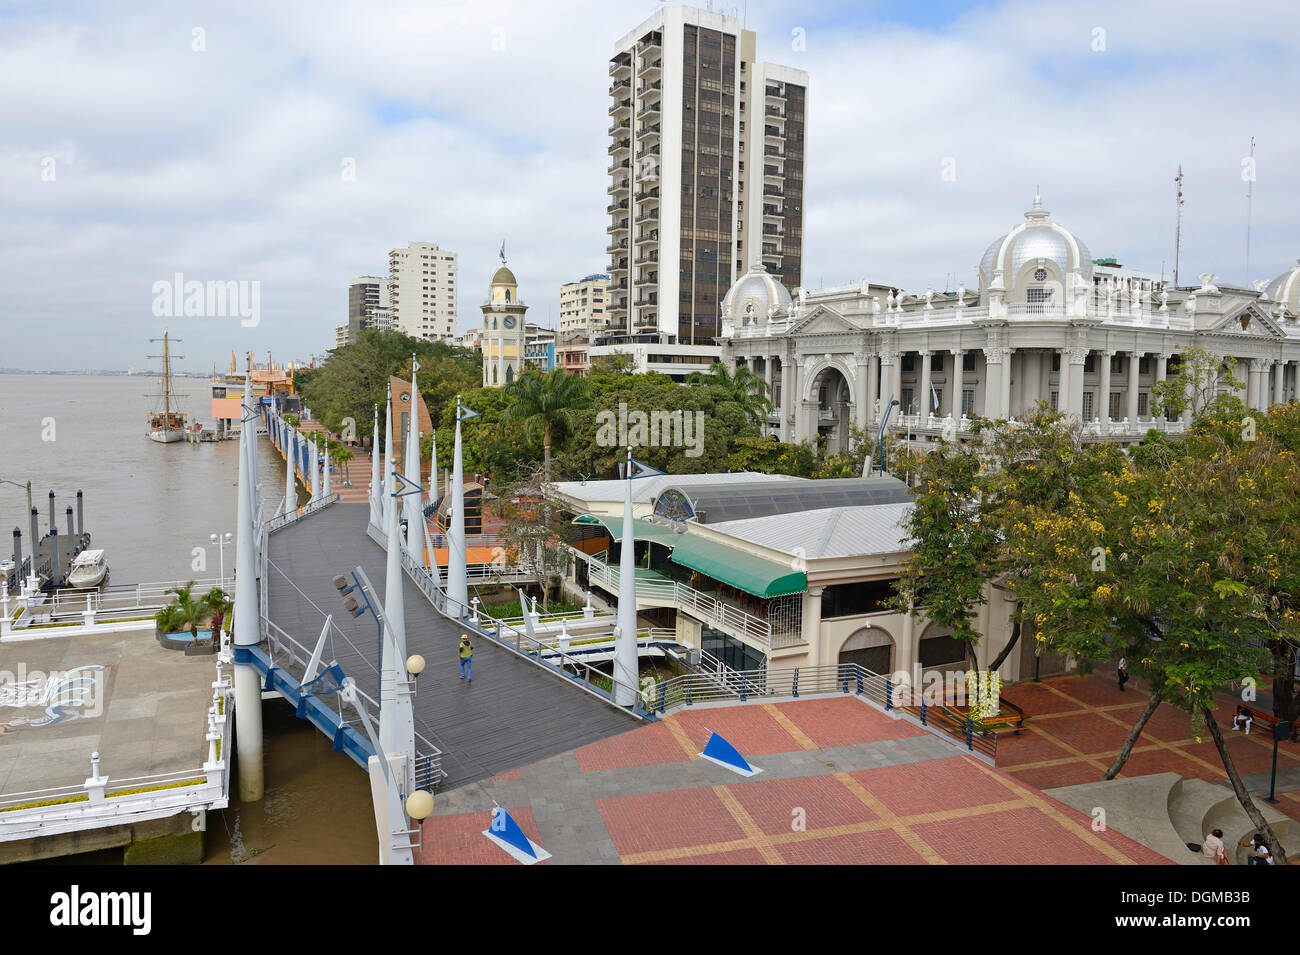 View of the waterfront of Park Malecon on the banks of Rio Guayas, Guayaquil, Ecuador, South America Stock Photo